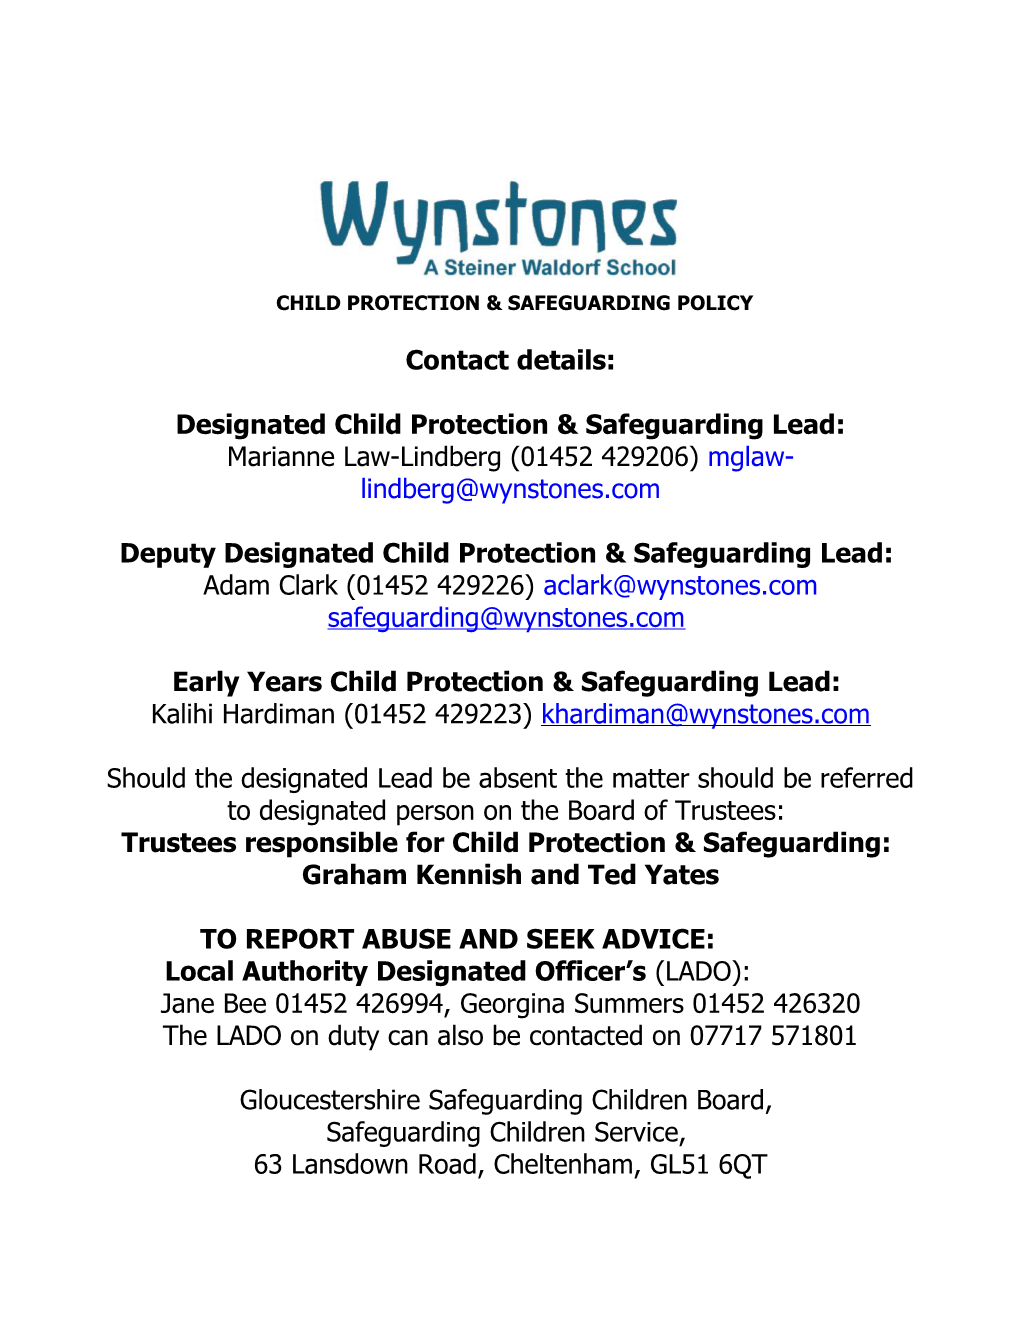 Child Protection & Safeguarding Policy